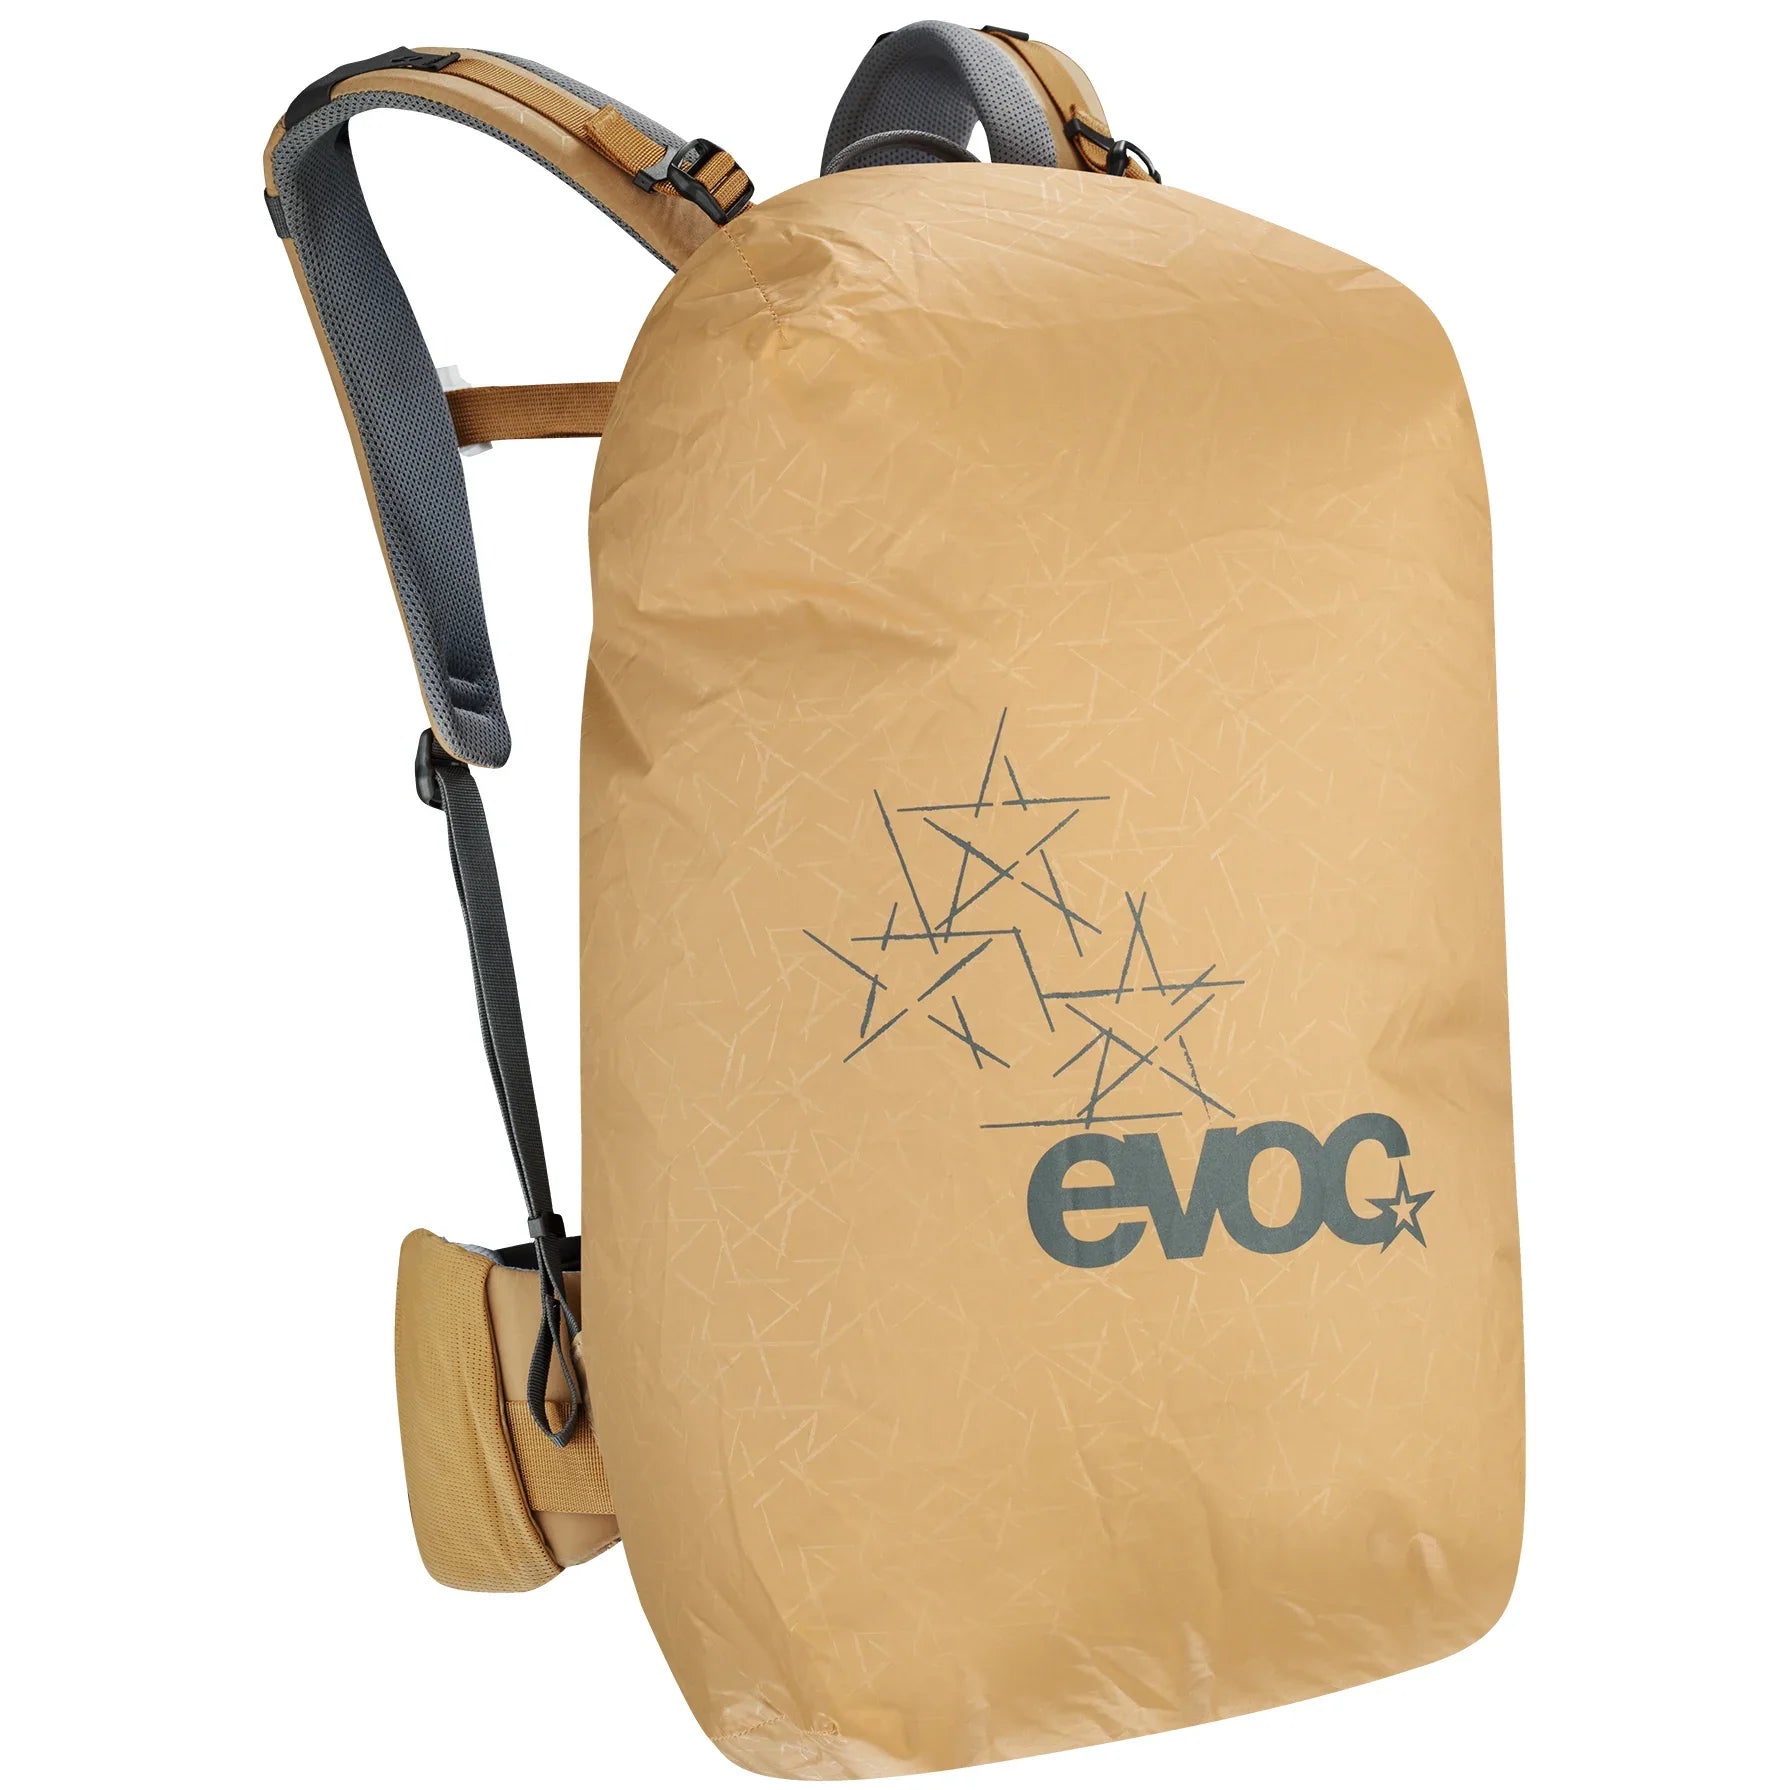 Evoc Protector Backpacks Neo S/M sac à dos 52 cm - rouge chili-gris carbone